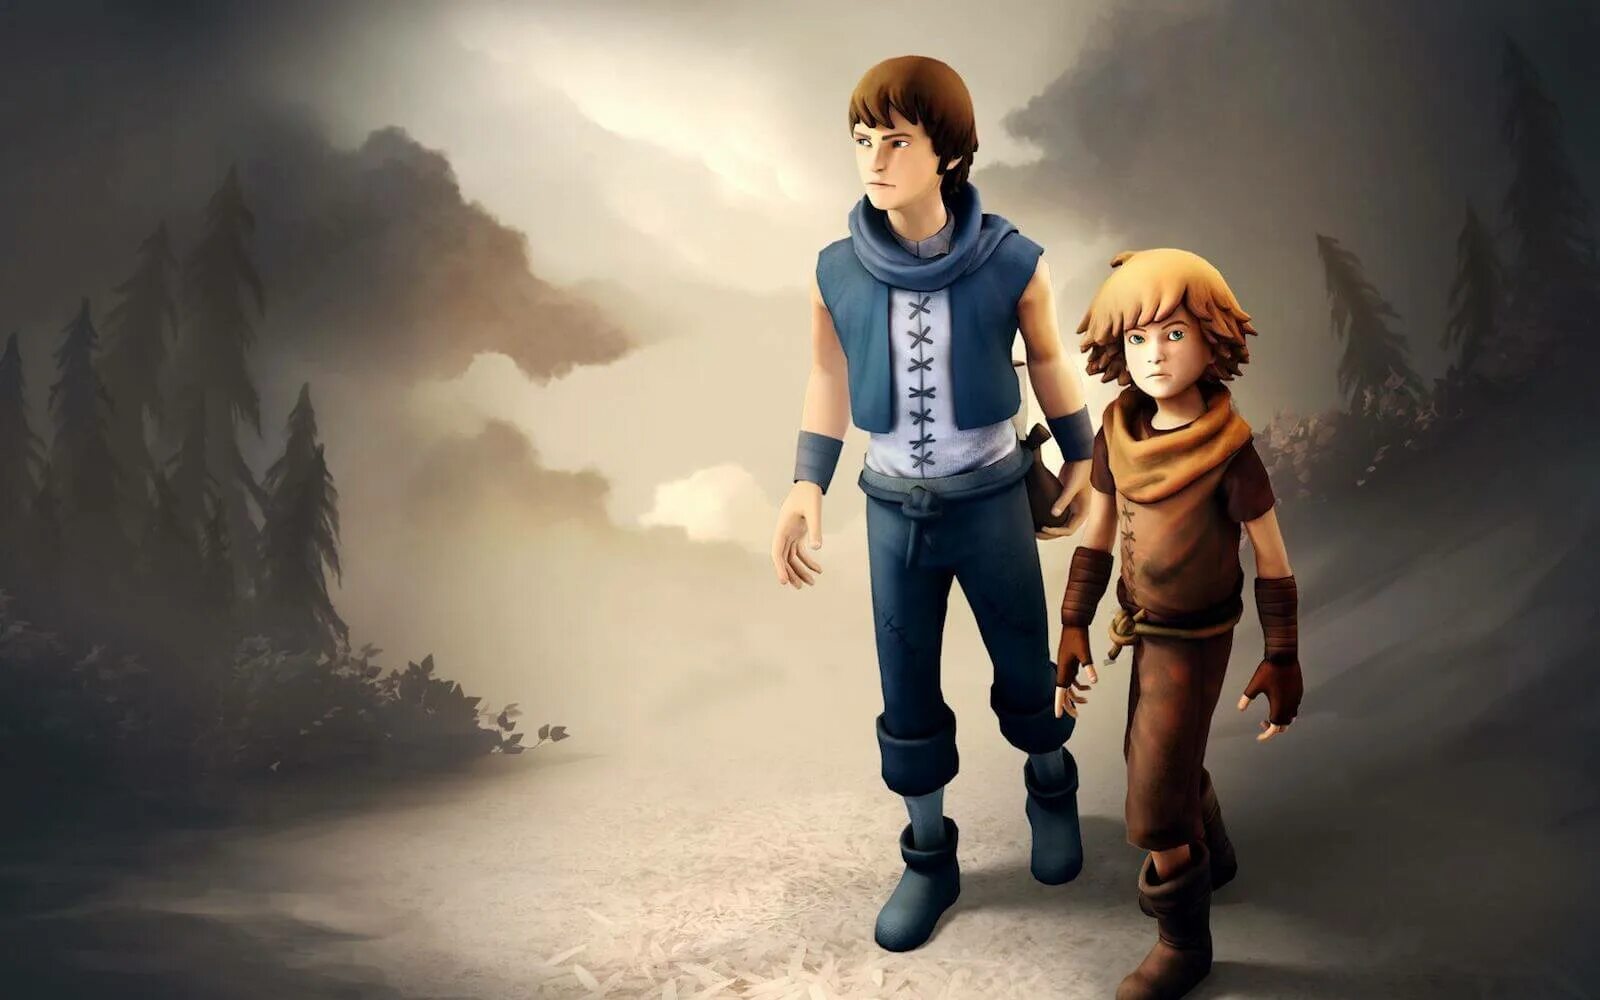 Brothers a tale андроид. Brothers: a Tale of two sons. Two brothers игра. Brothers: a Tale of two sons (2013). Brothers a Tale of two sons Скриншоты.